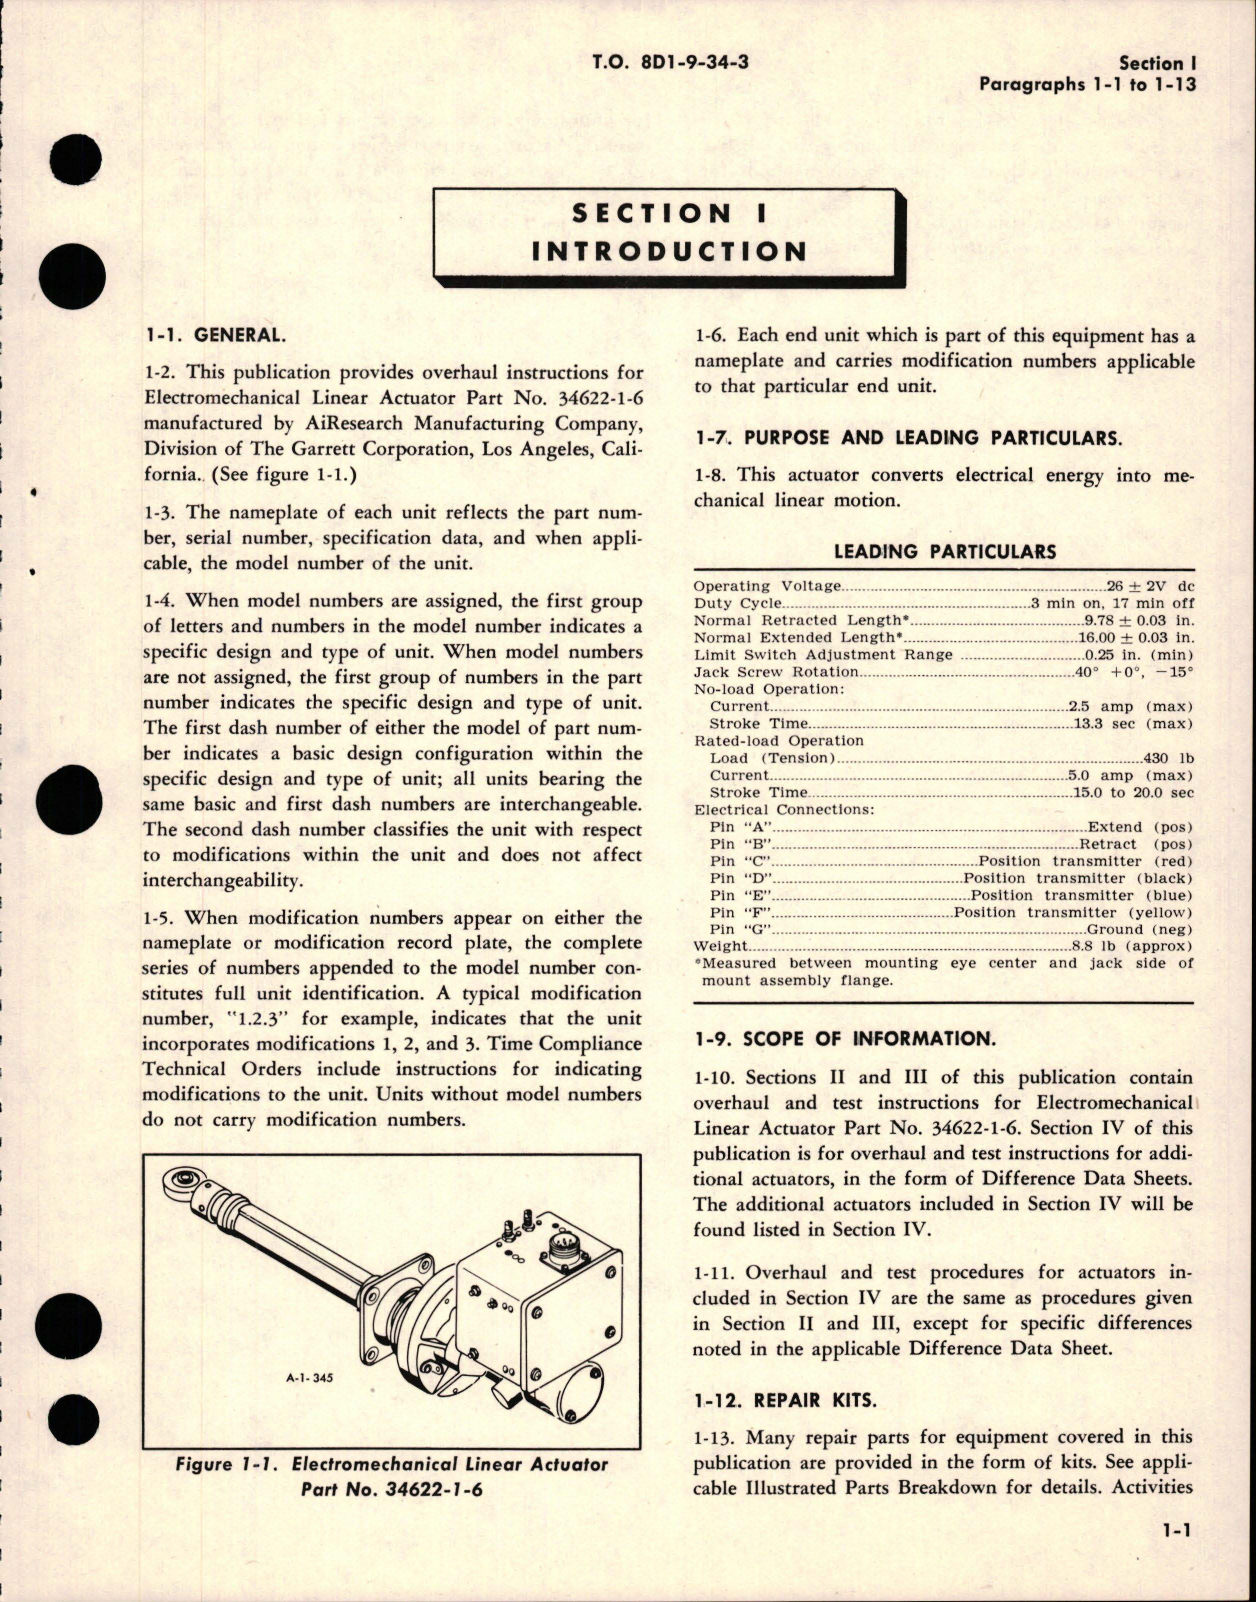 Sample page 5 from AirCorps Library document: Overhaul for Electromechanical Linear Actuators - Parts 34622, 34622-1, and 34622-1-6 - Models ELA20-43, -44